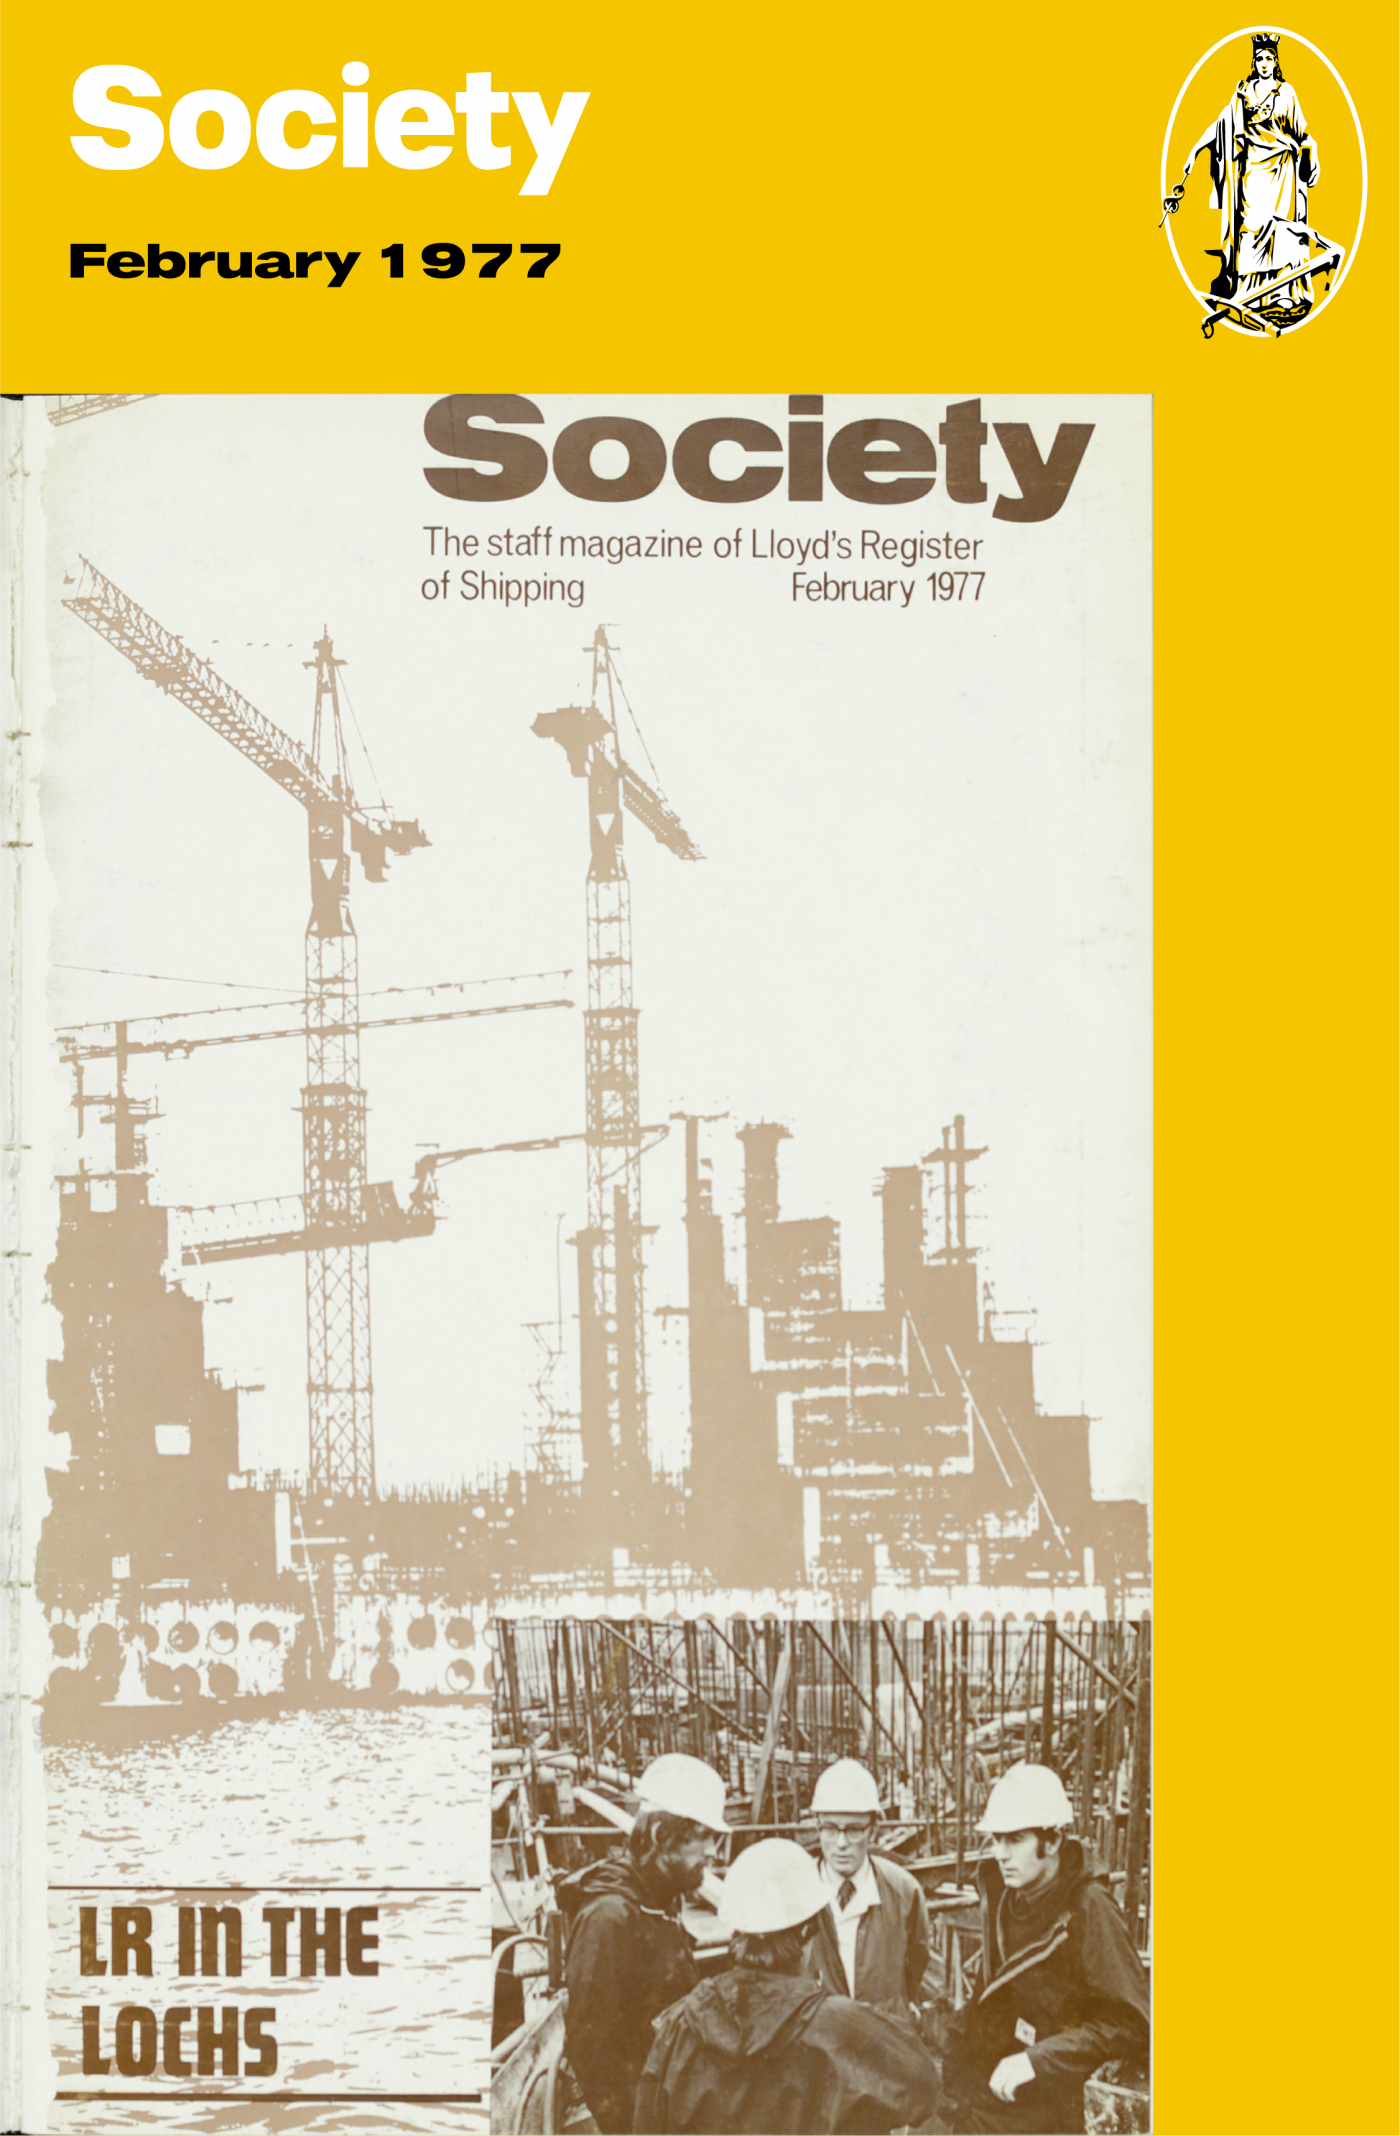 Highlights from the February 1977 edition of Society included an article on Lloyd's Register's inspection work in the Federal Republic of Germany and the famous 1976 heatwave in the UK.